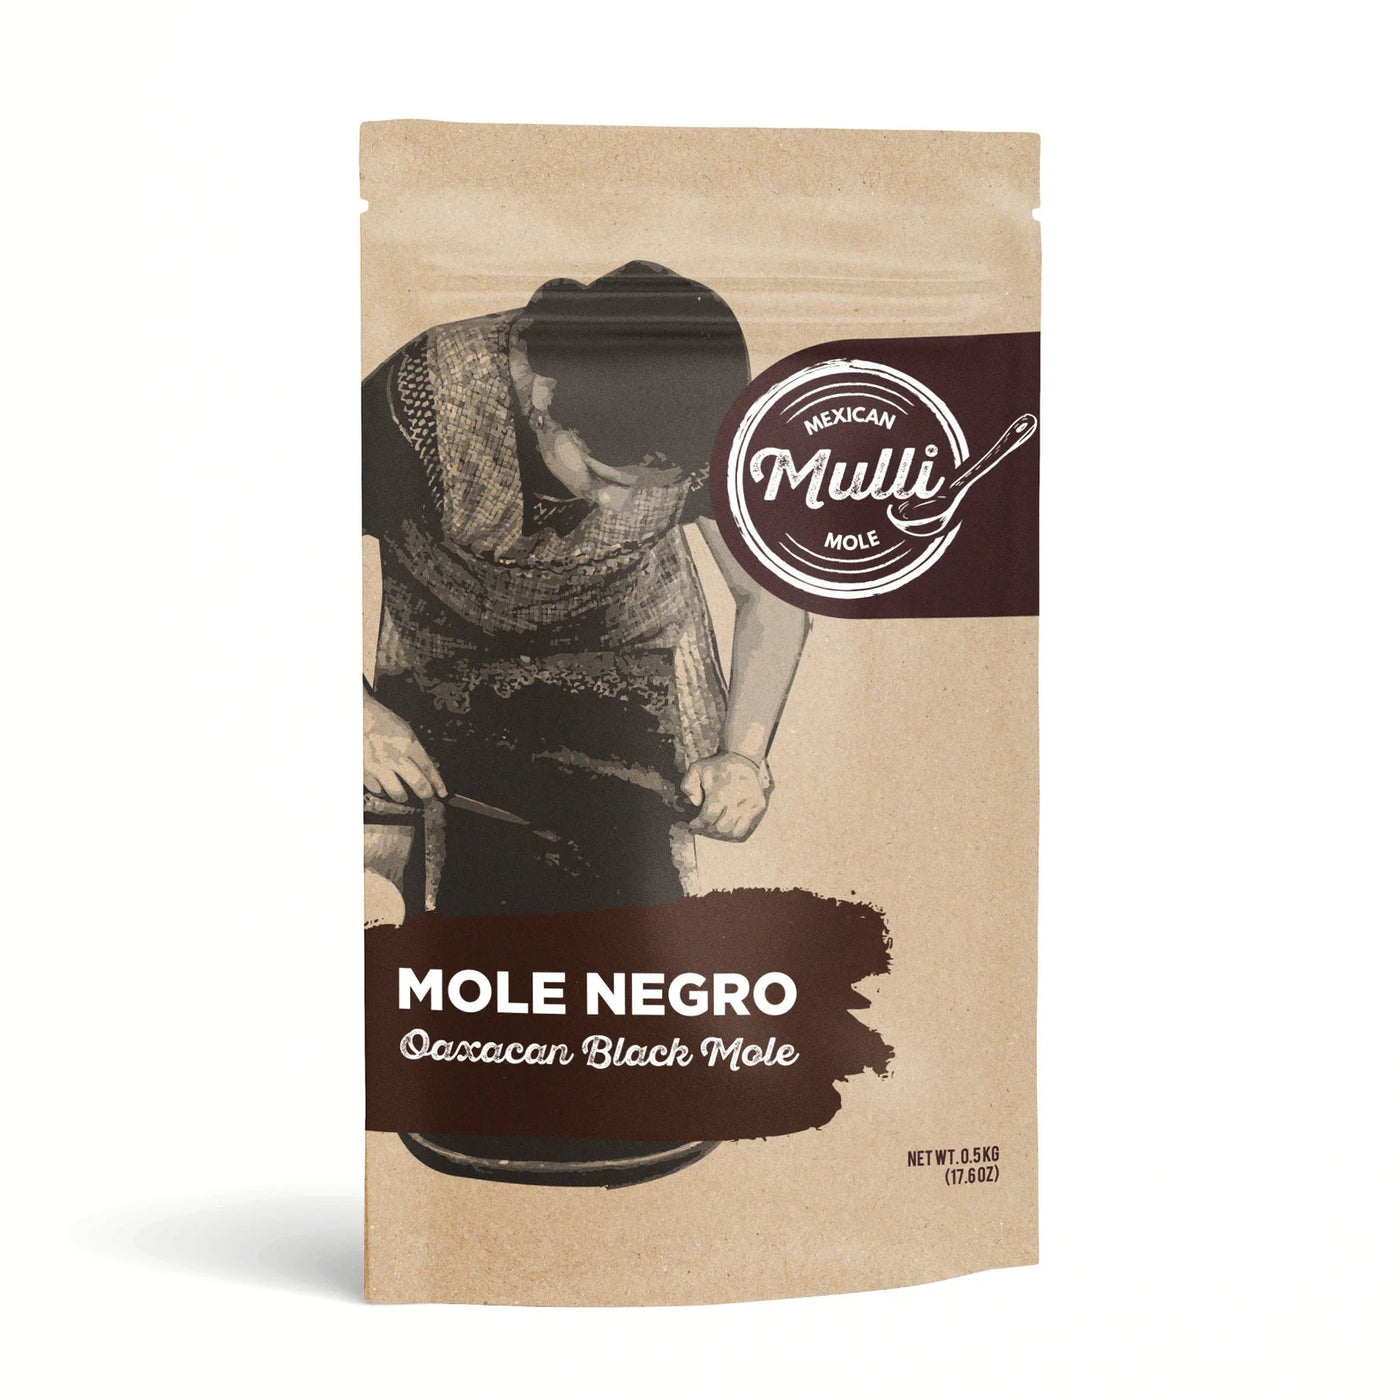 Front view of Mexican Milli Mole - Mole Negro with branded plastic pouch with a Ziploc style closure.